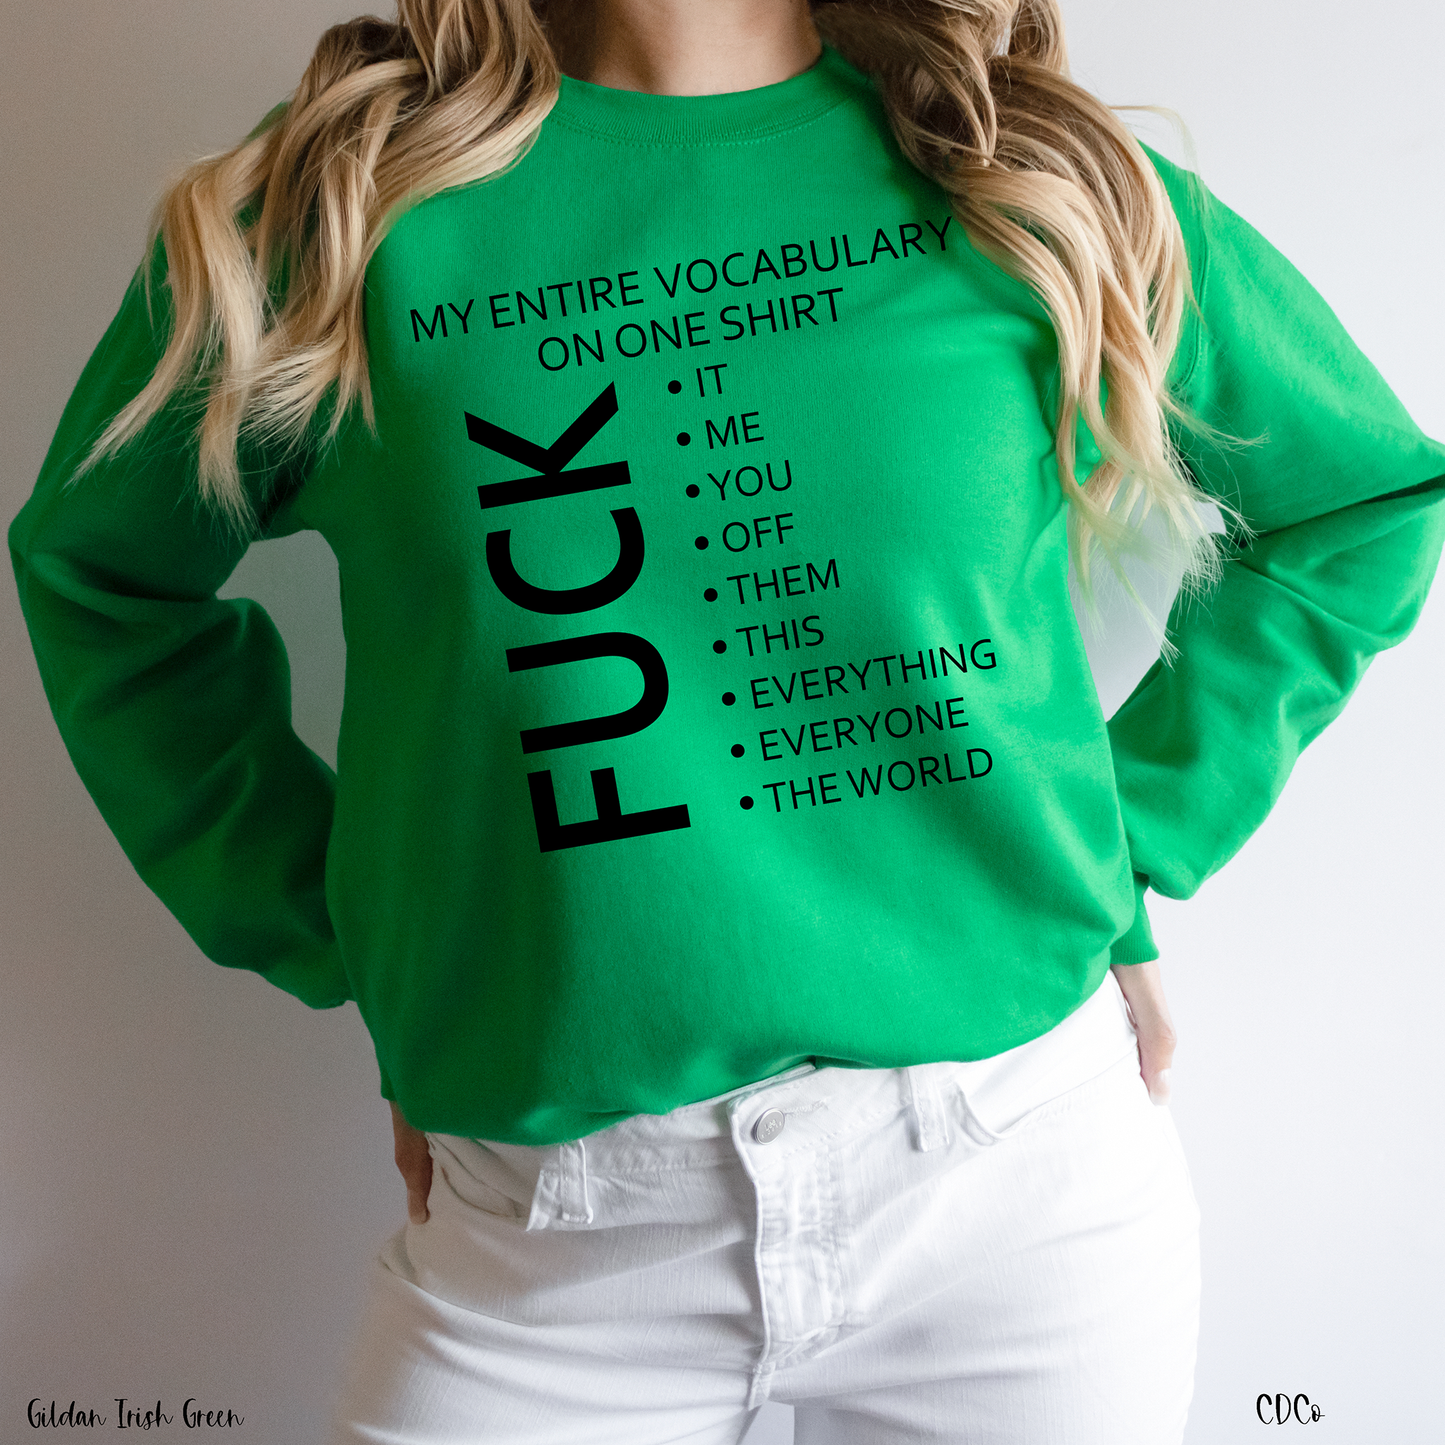 My Entire Vocabulary on One Shirt F*CK It (325°)